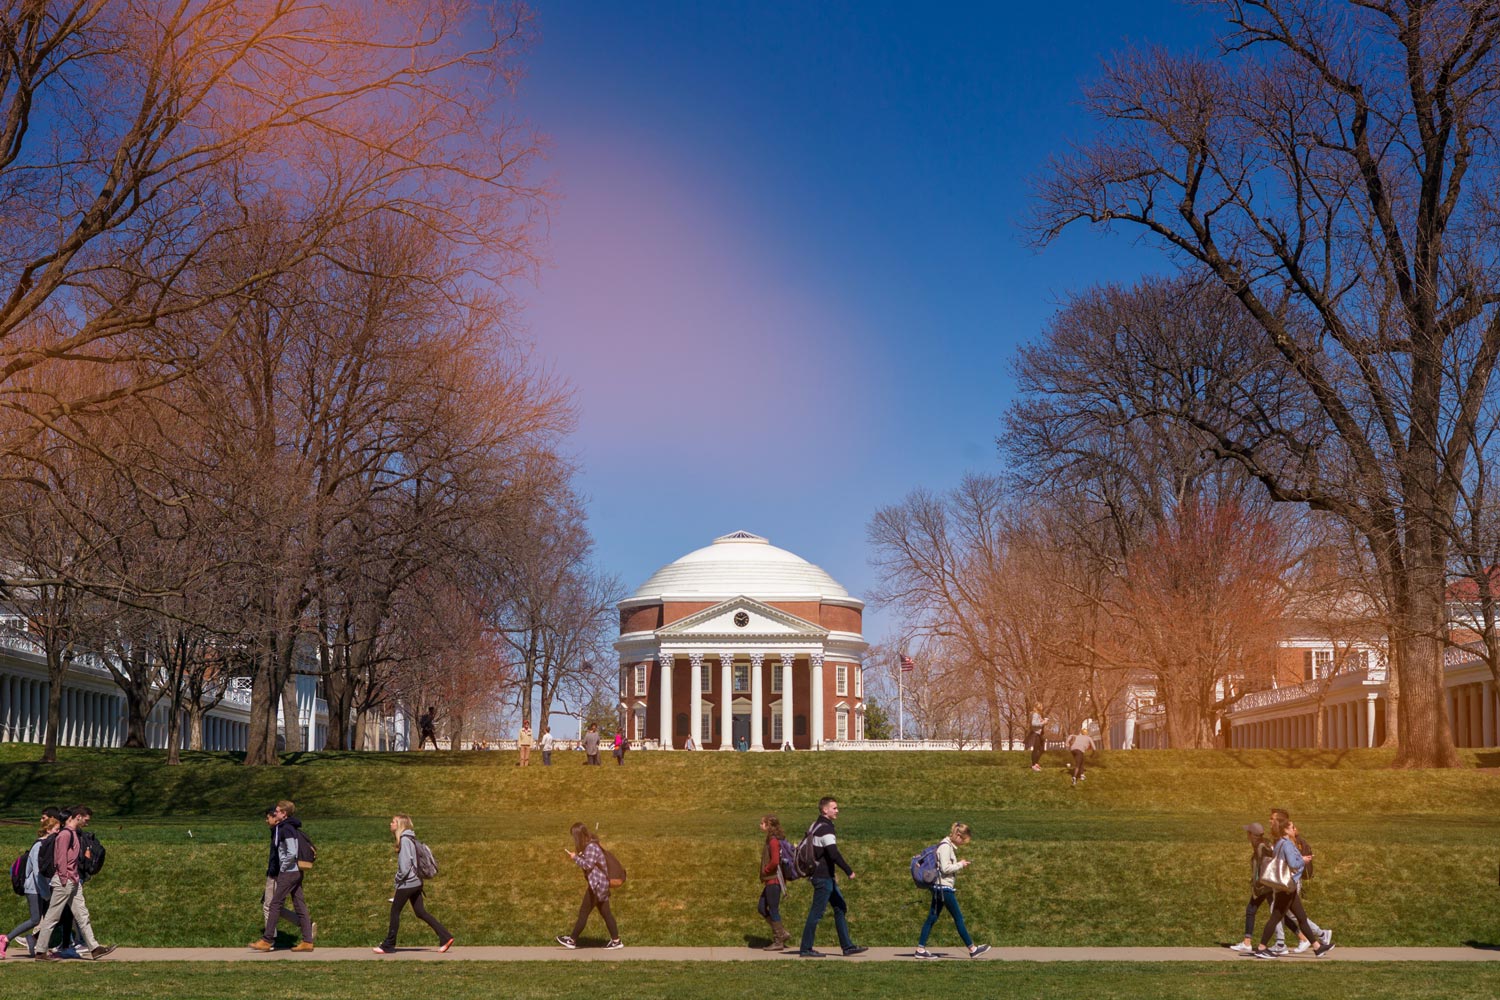 Students walk on a sidewalk on the Lawn with a backdrop of the Rotunda